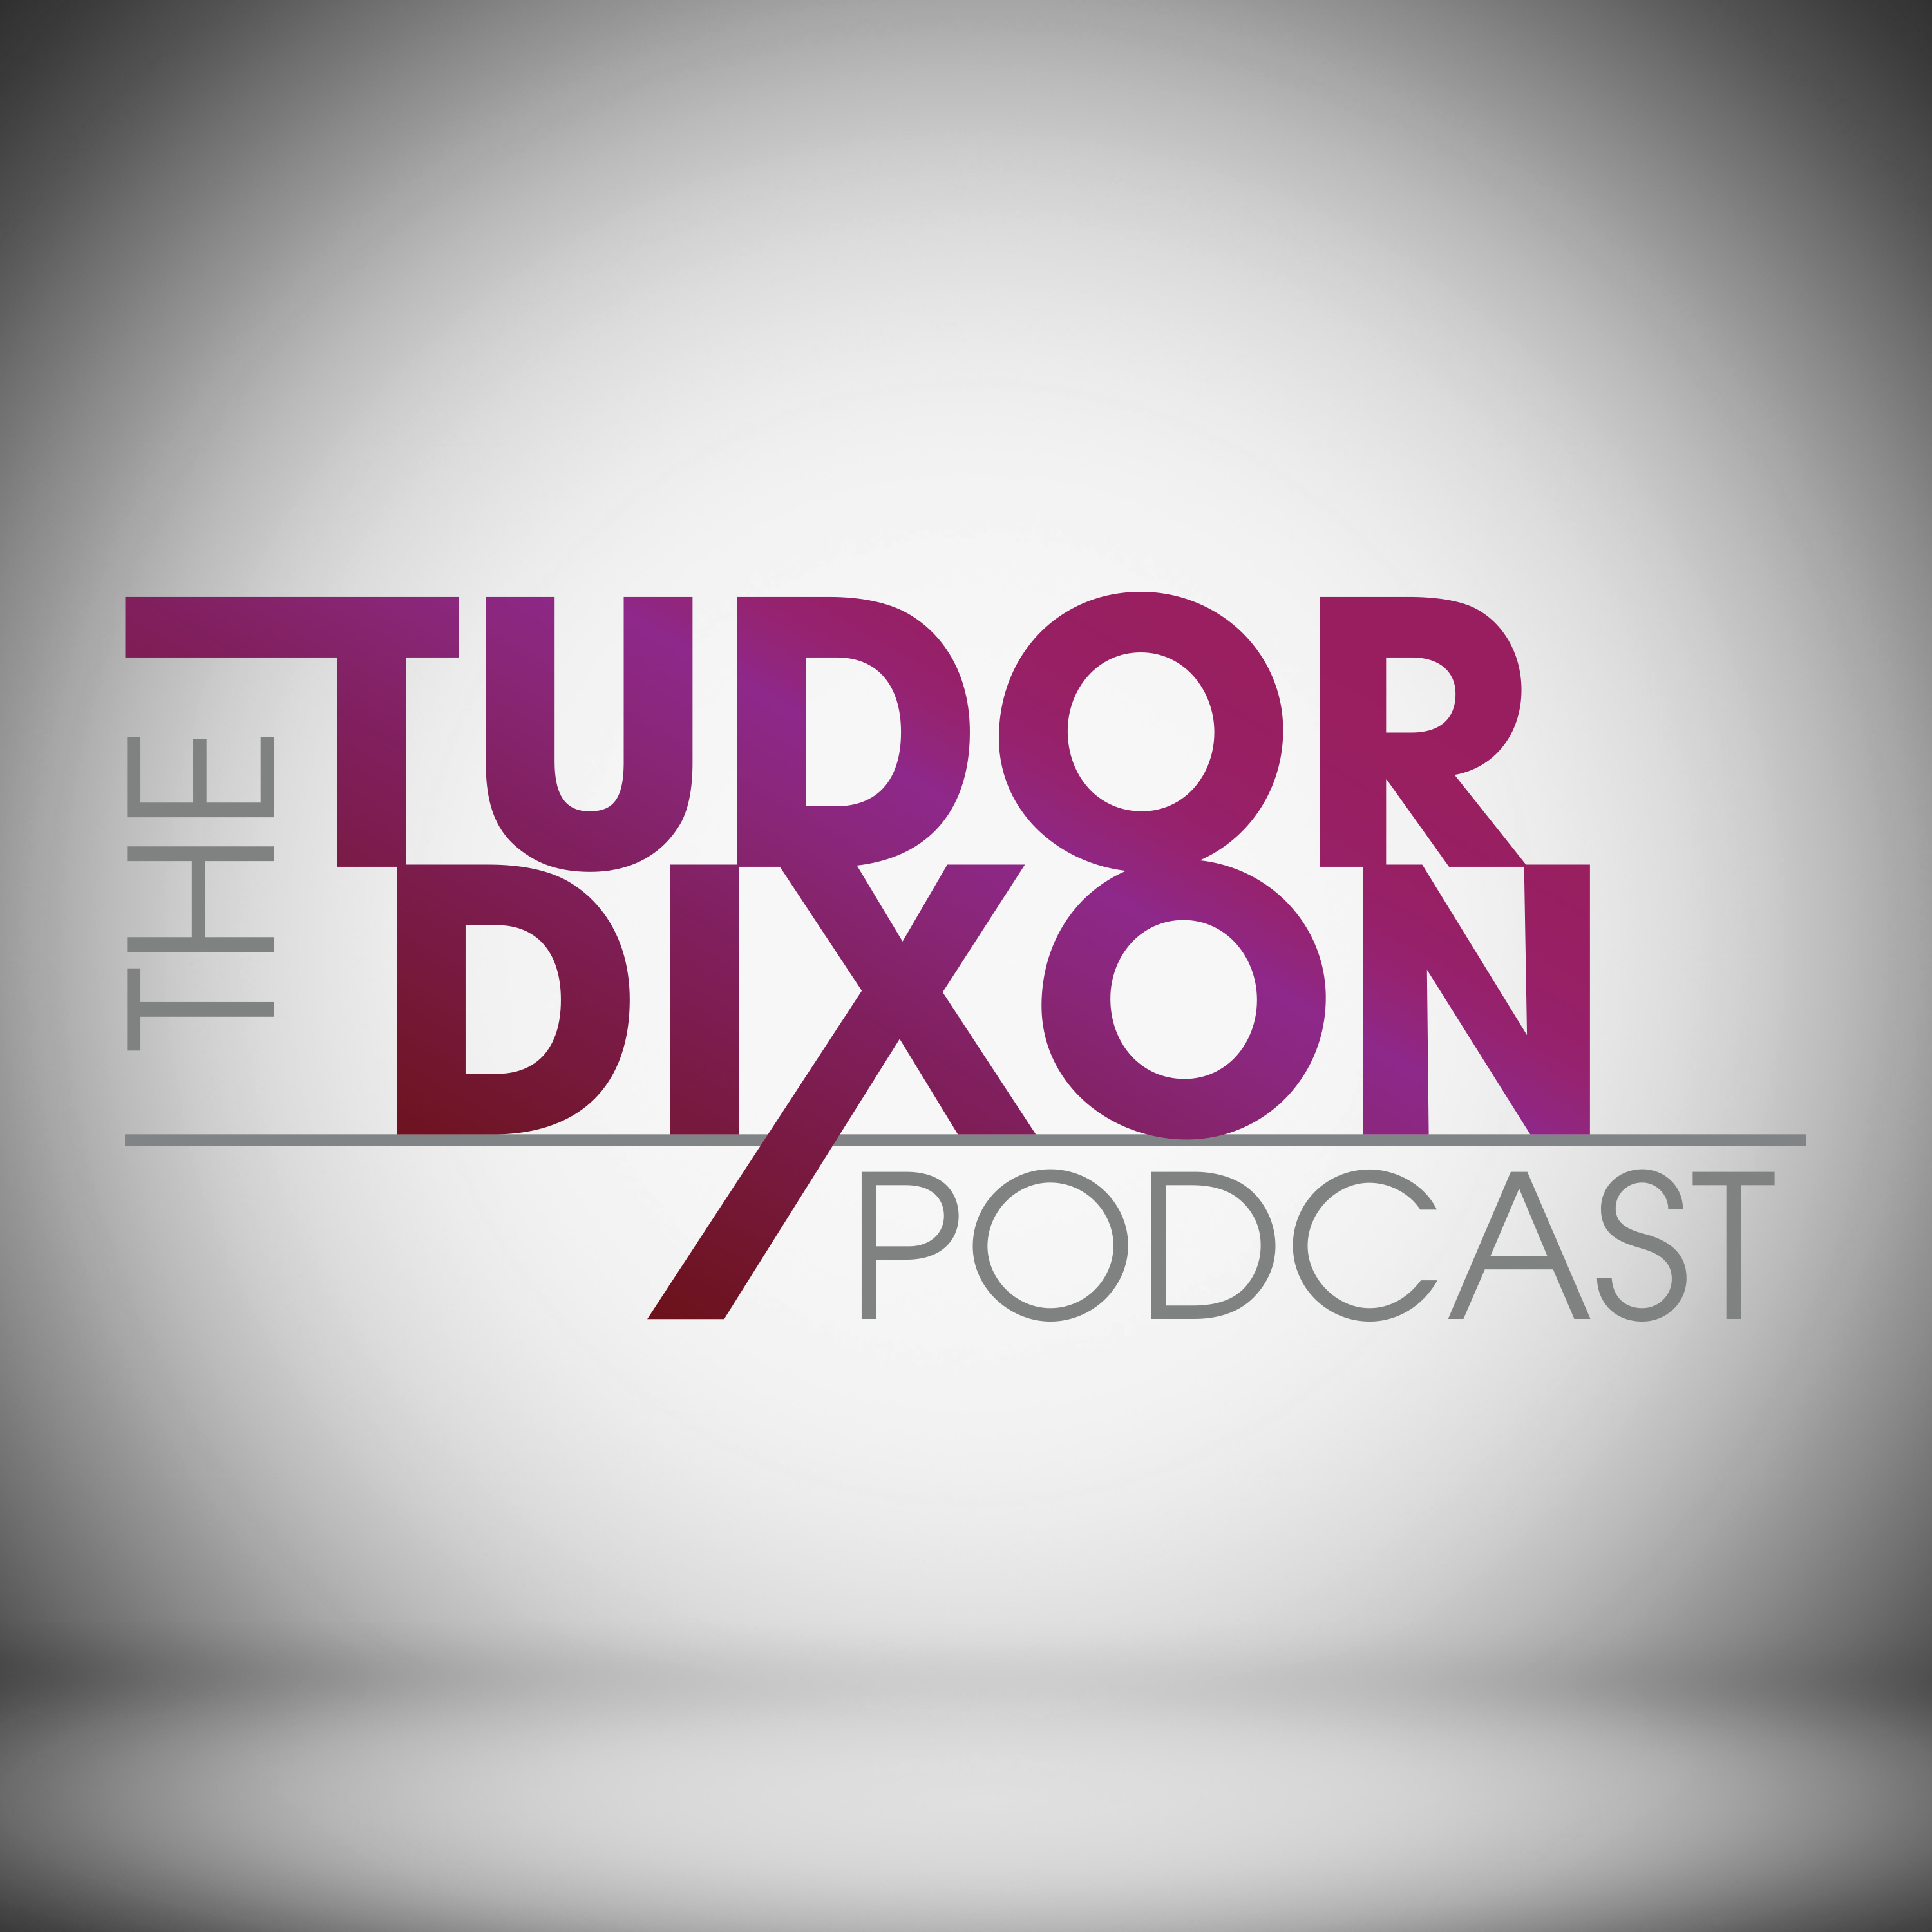 The Tudor Dixon Podcast: From Indictments to Election Interference with Julie Kelly